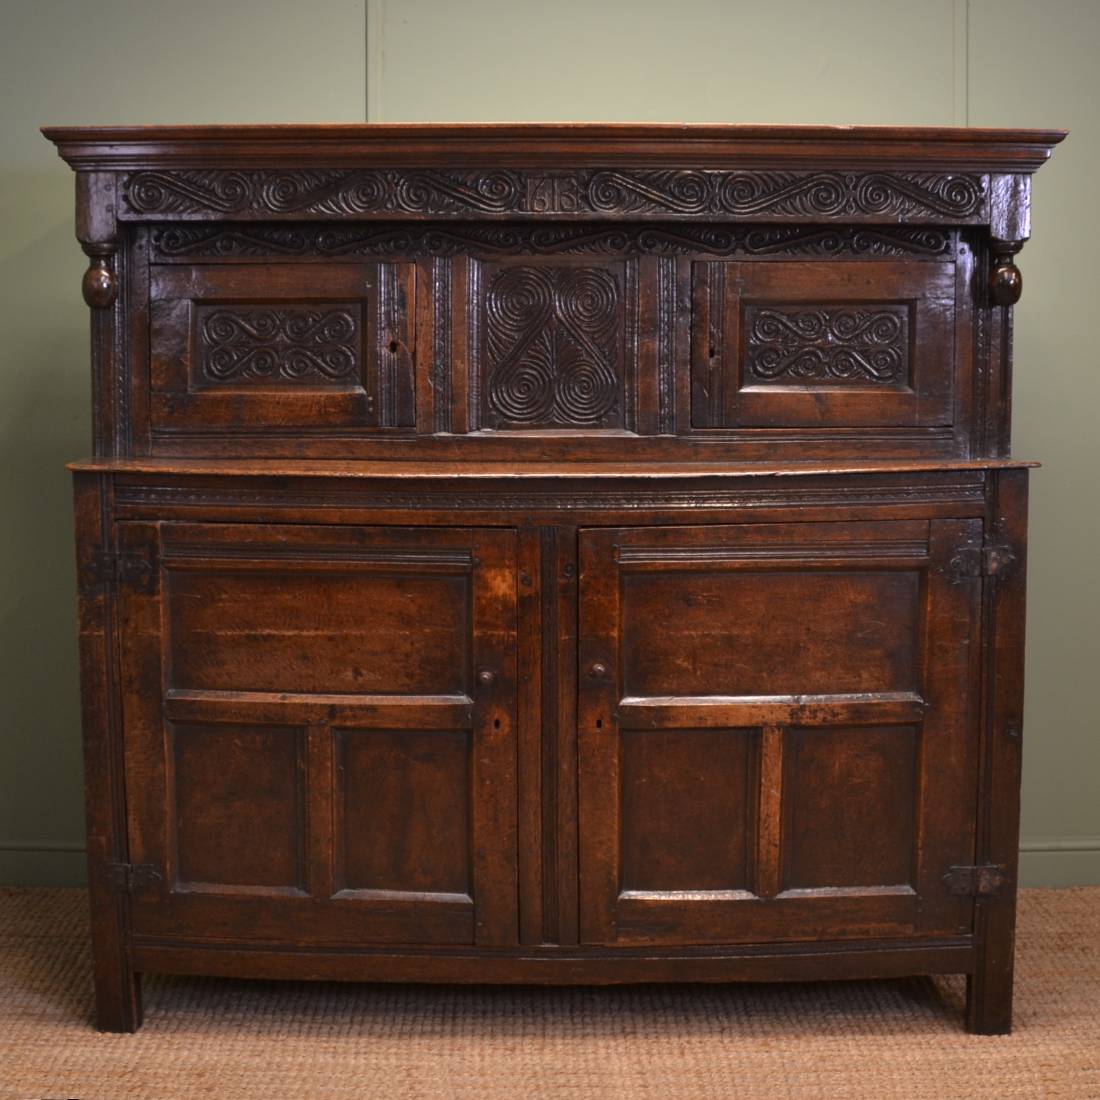 Antique Court Cupboard Dated 1613